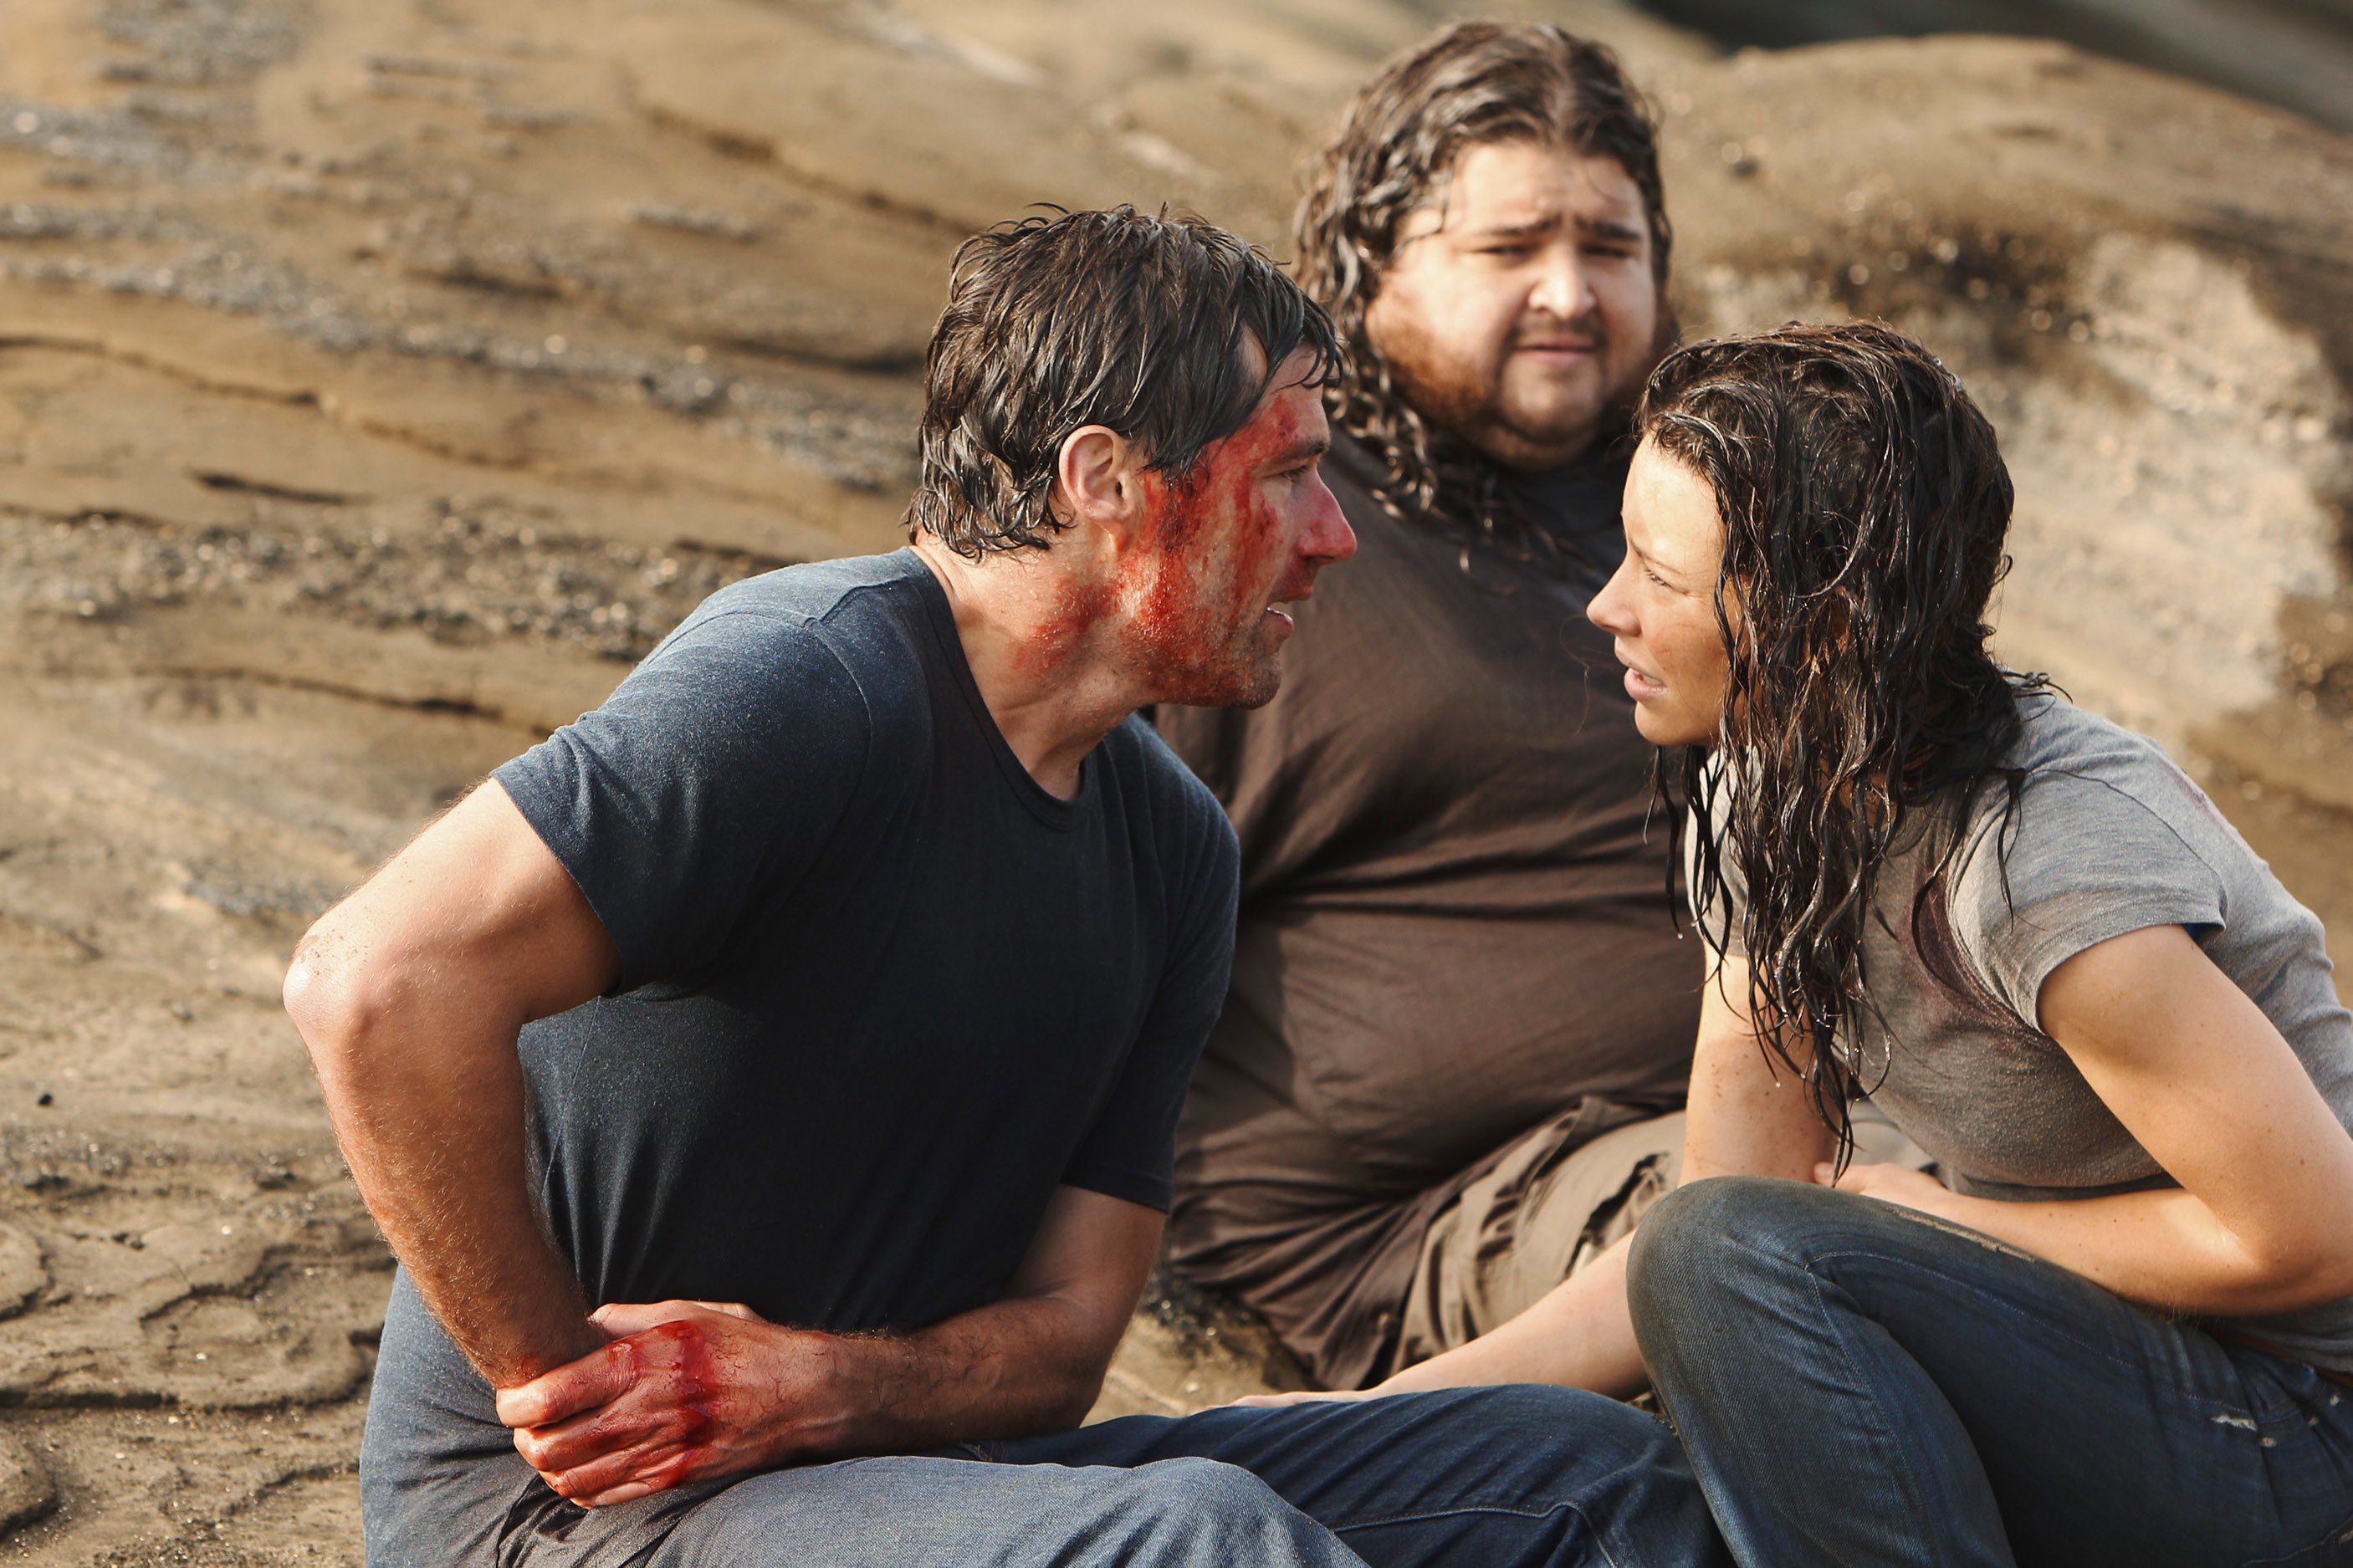 three of the characters sitting on a beach, exhausted, one with blood all over his face